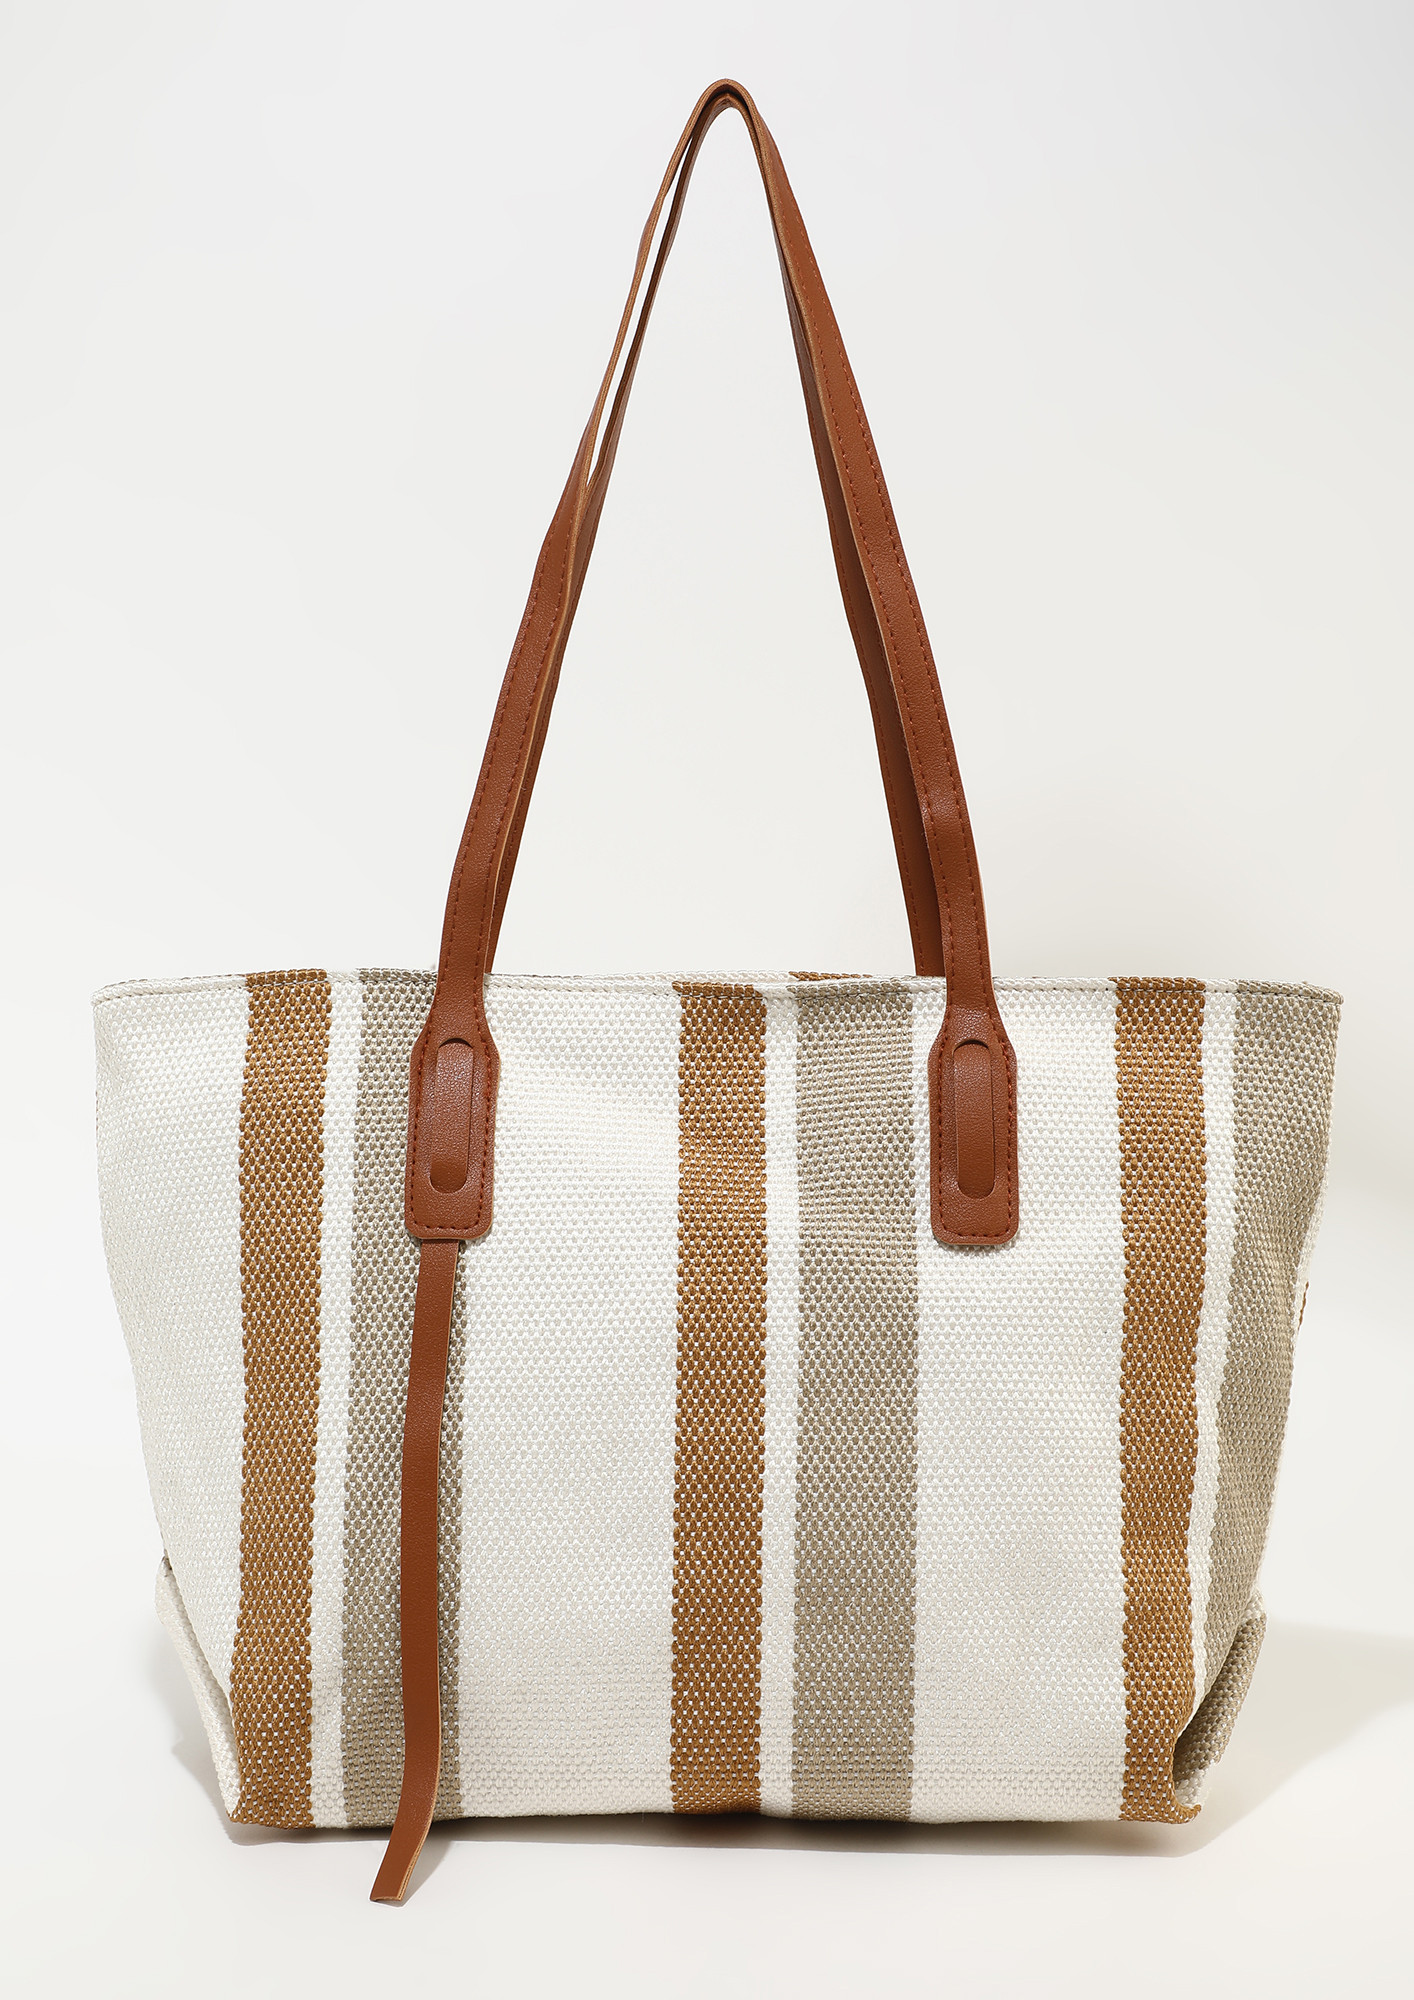 Striped tote bag with tan strap : Large size – Sugarbox India